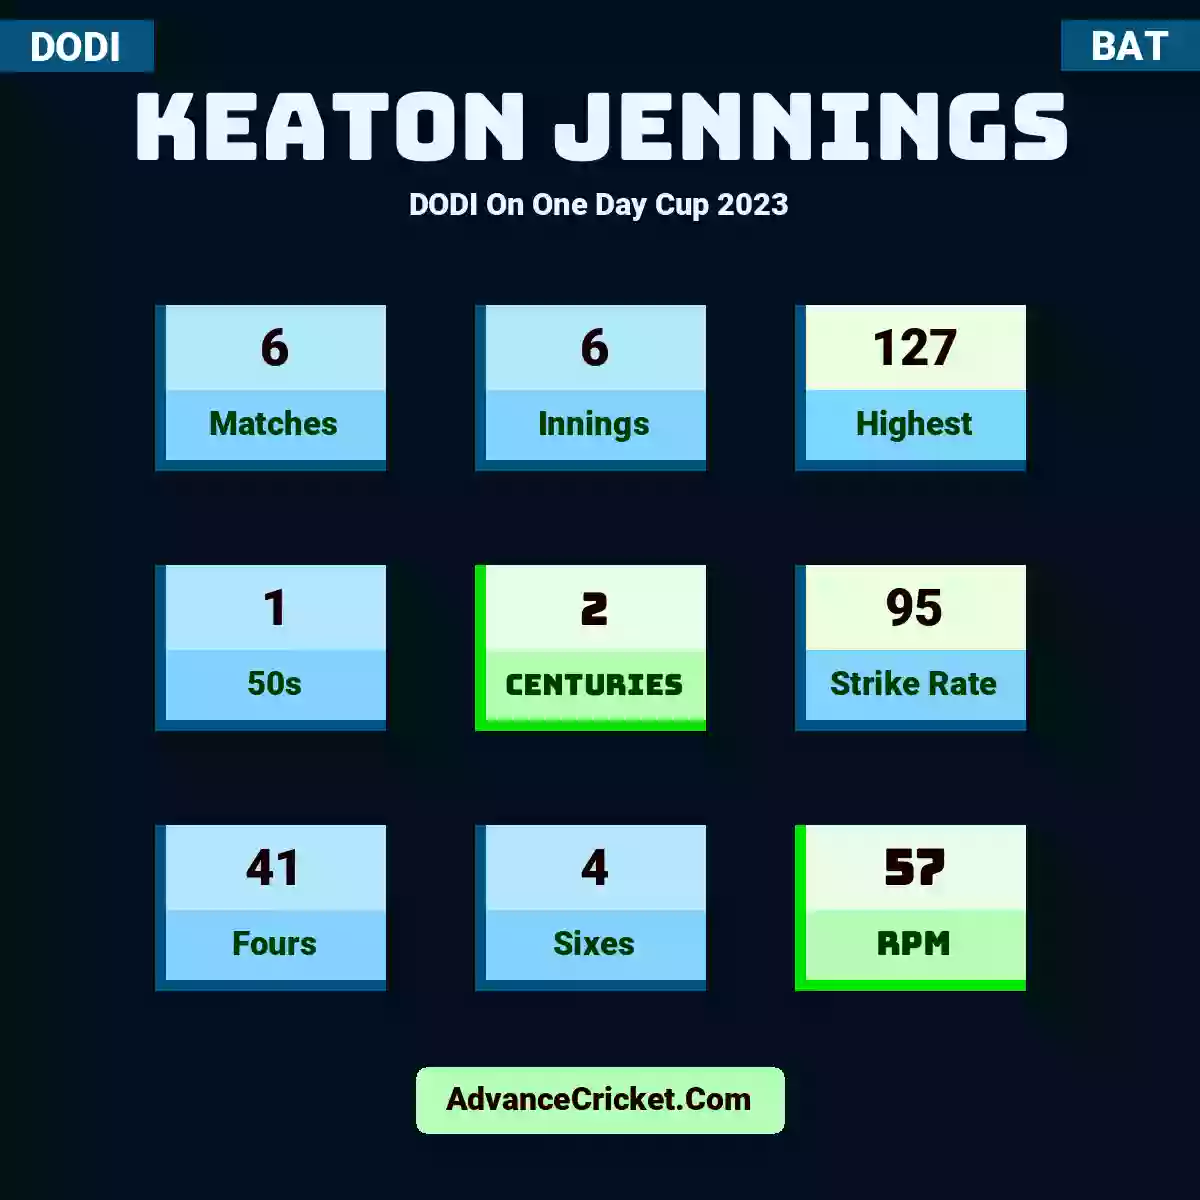 Keaton Jennings DODI  On One Day Cup 2023, Keaton Jennings played 6 matches, scored 127 runs as highest, 1 half-centuries, and 2 centuries, with a strike rate of 95. K.Jennings hit 41 fours and 4 sixes, with an RPM of 57.